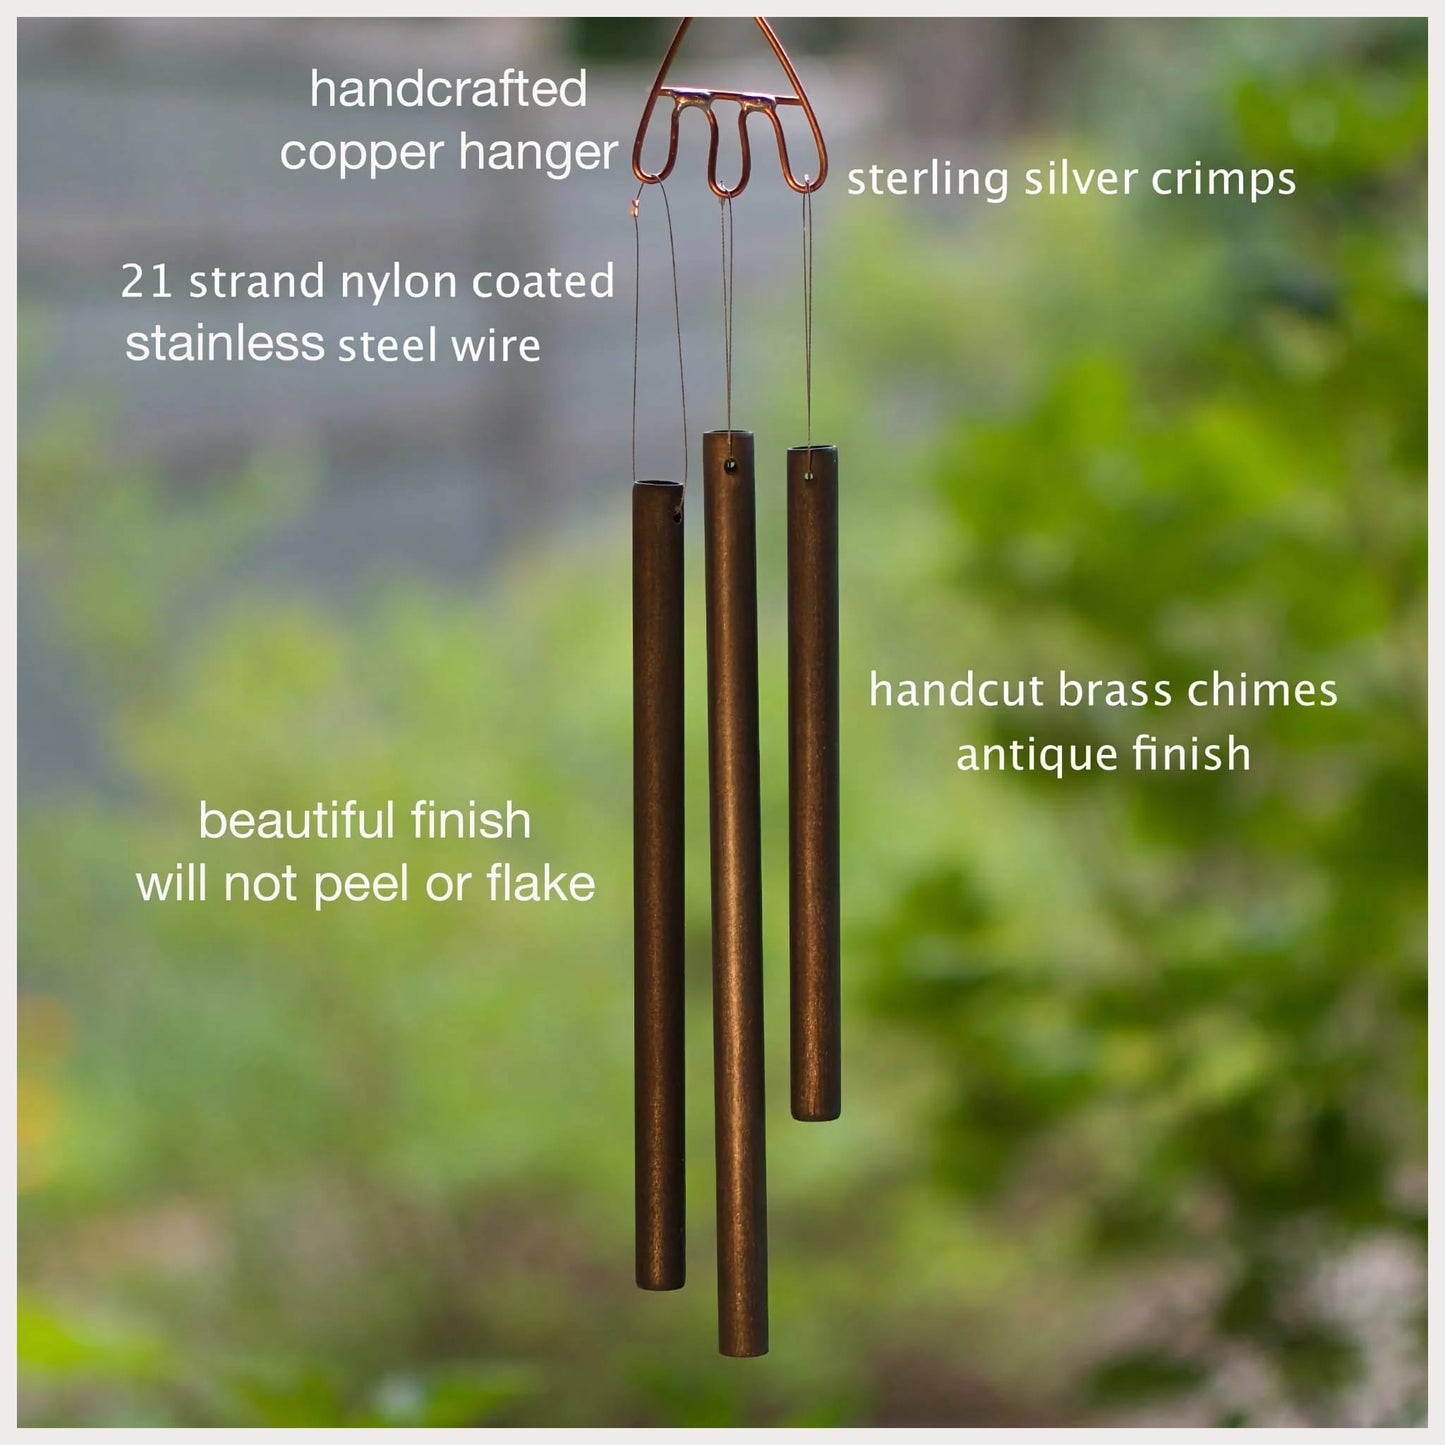 about handmade chimes